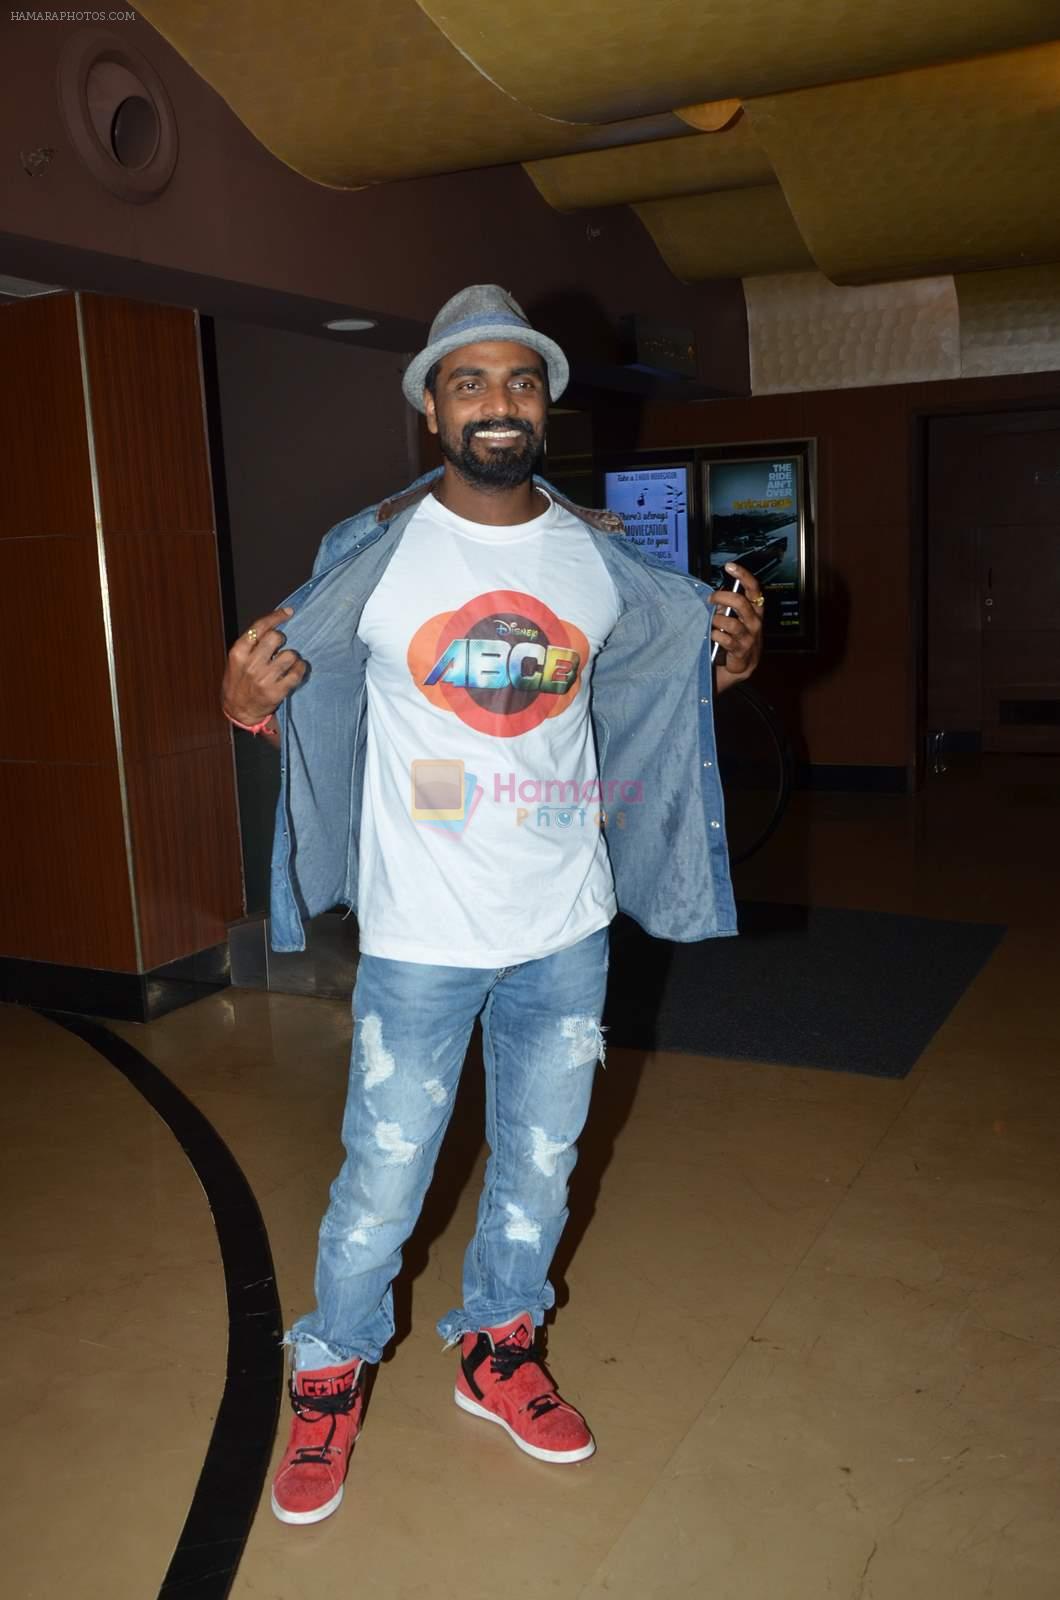 Remo Dsouza at ABCD2 premiere in Mumbai on 17th June 2015